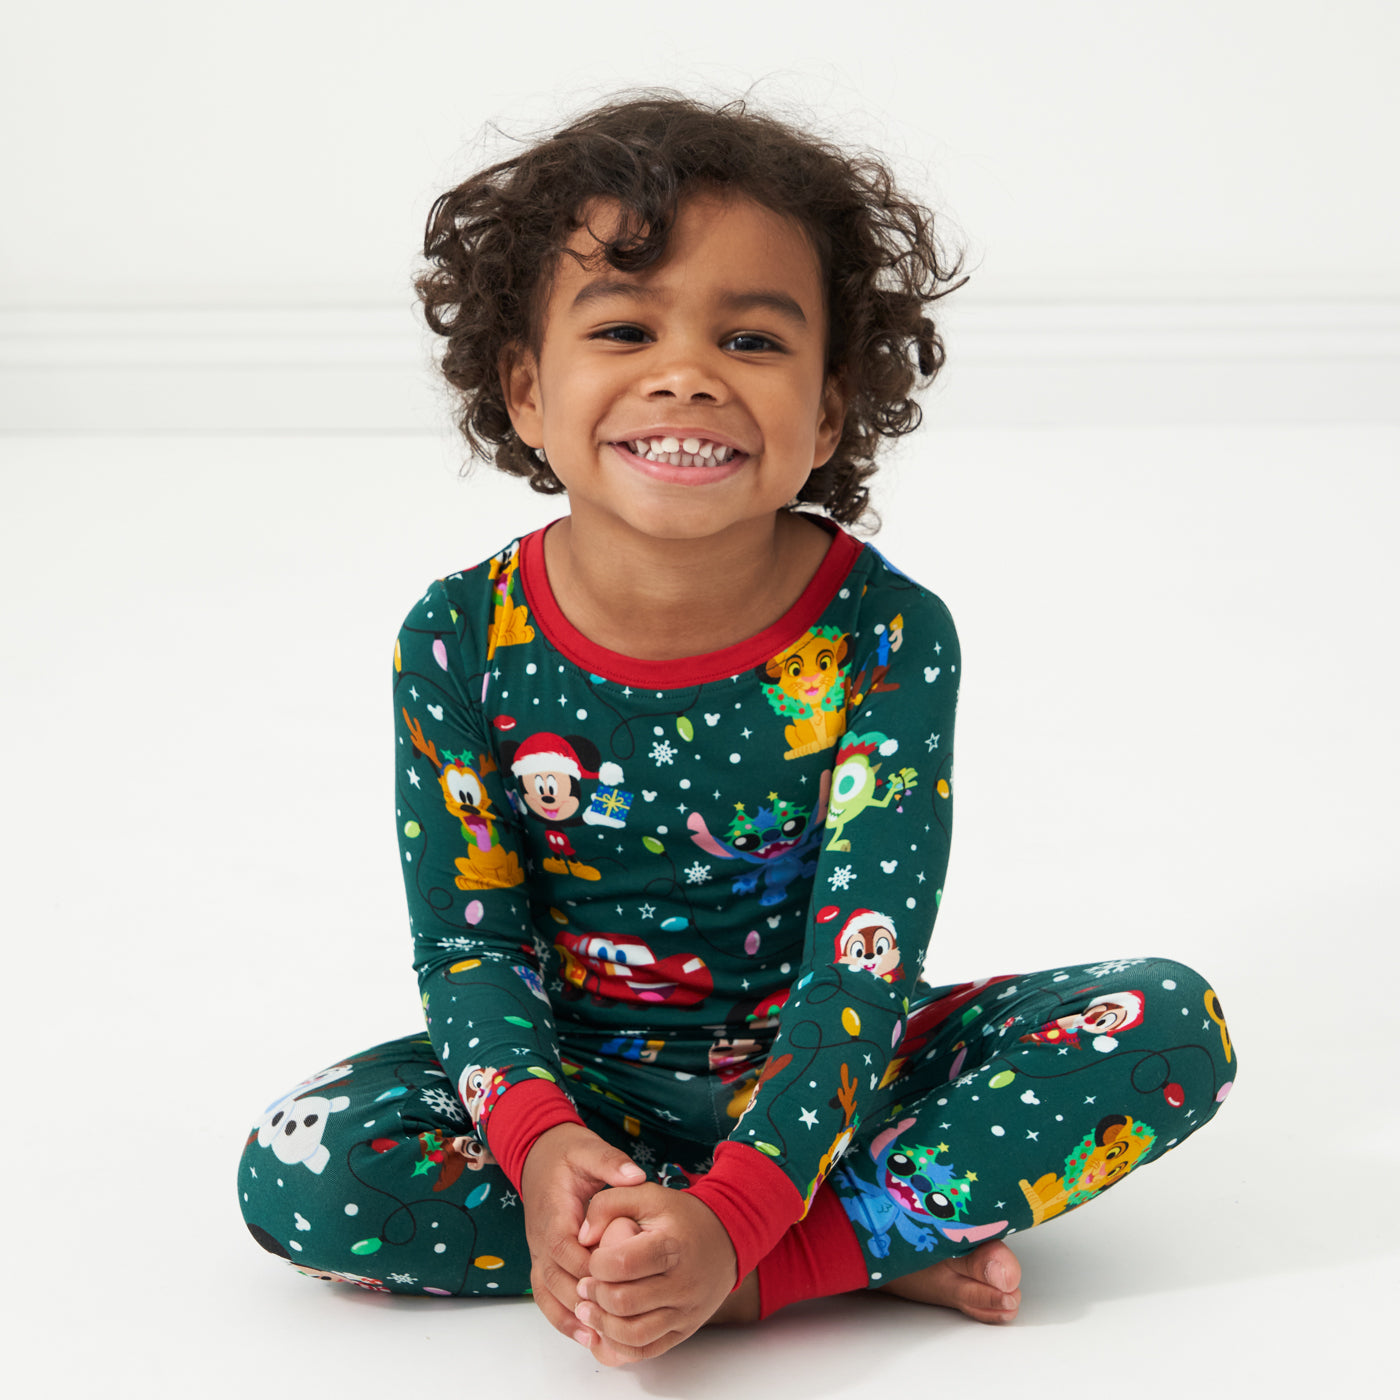 Child sitting on the ground wearing a Disney Christmas Party two piece pajama set